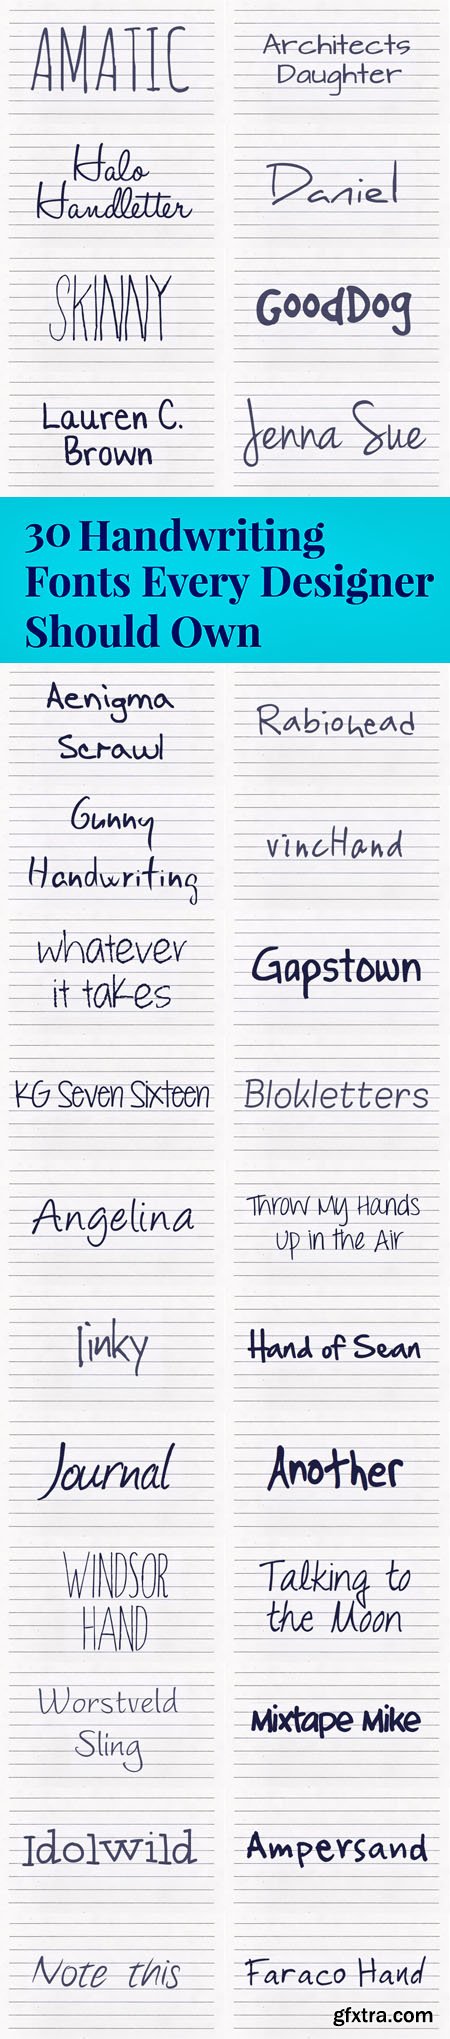 30 Handwriting Fonts Every Designer Should Own!